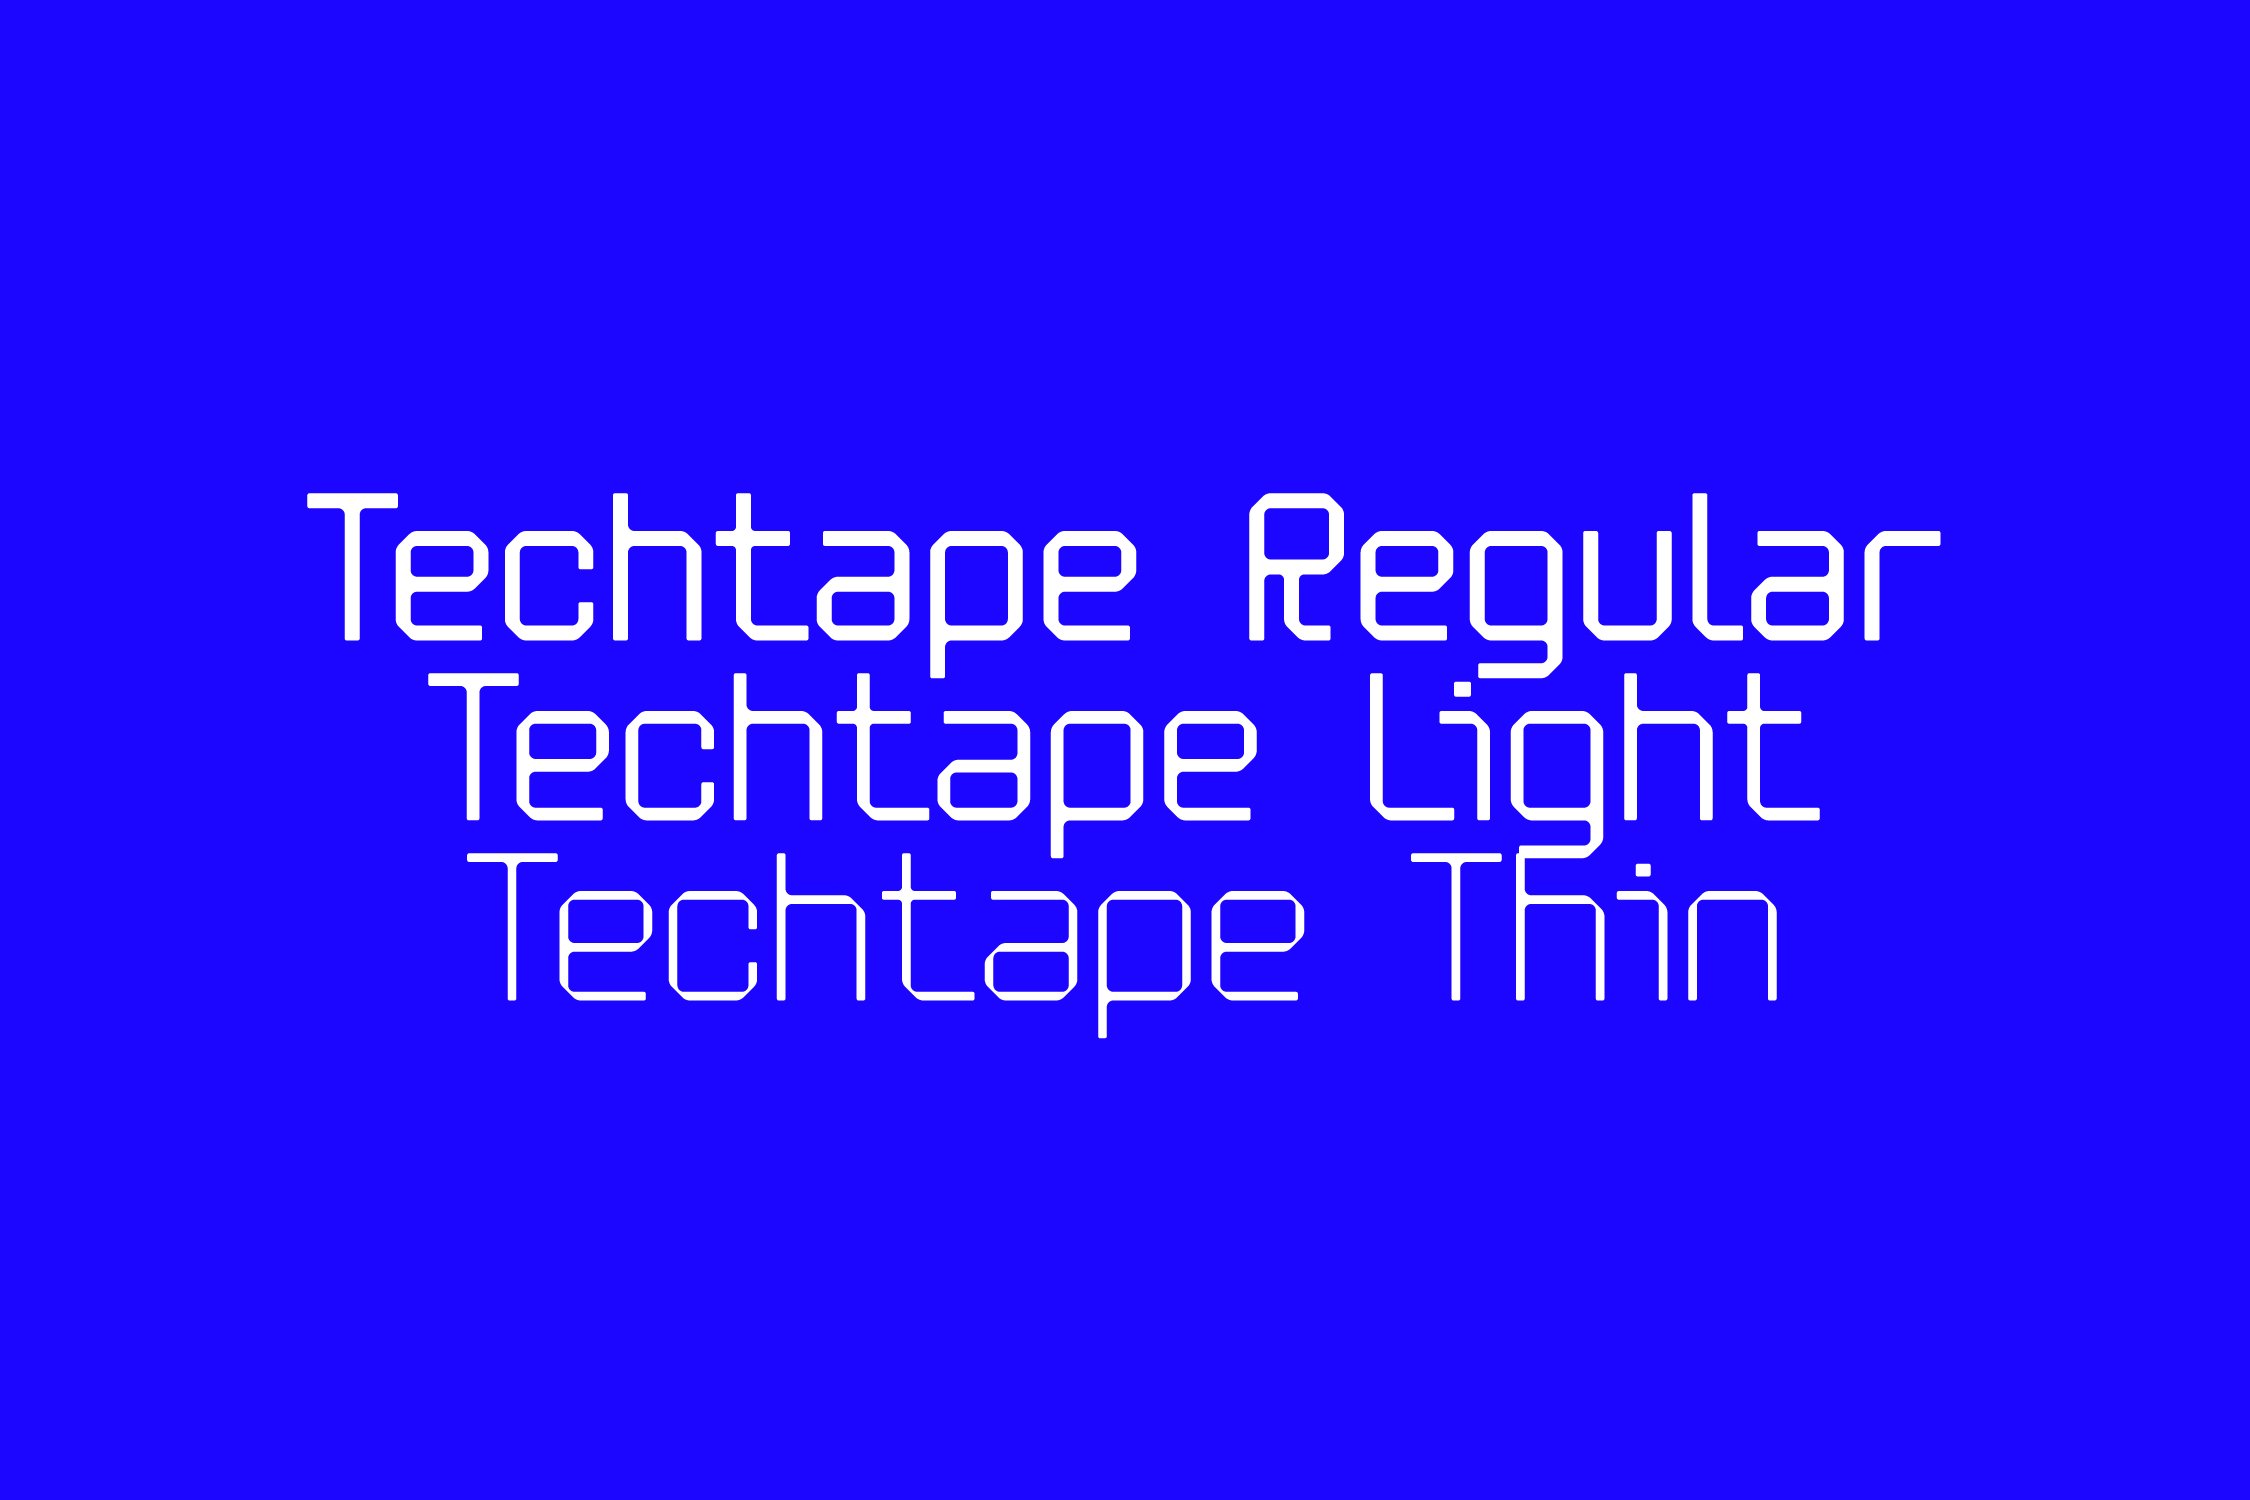 Techtape cover image.